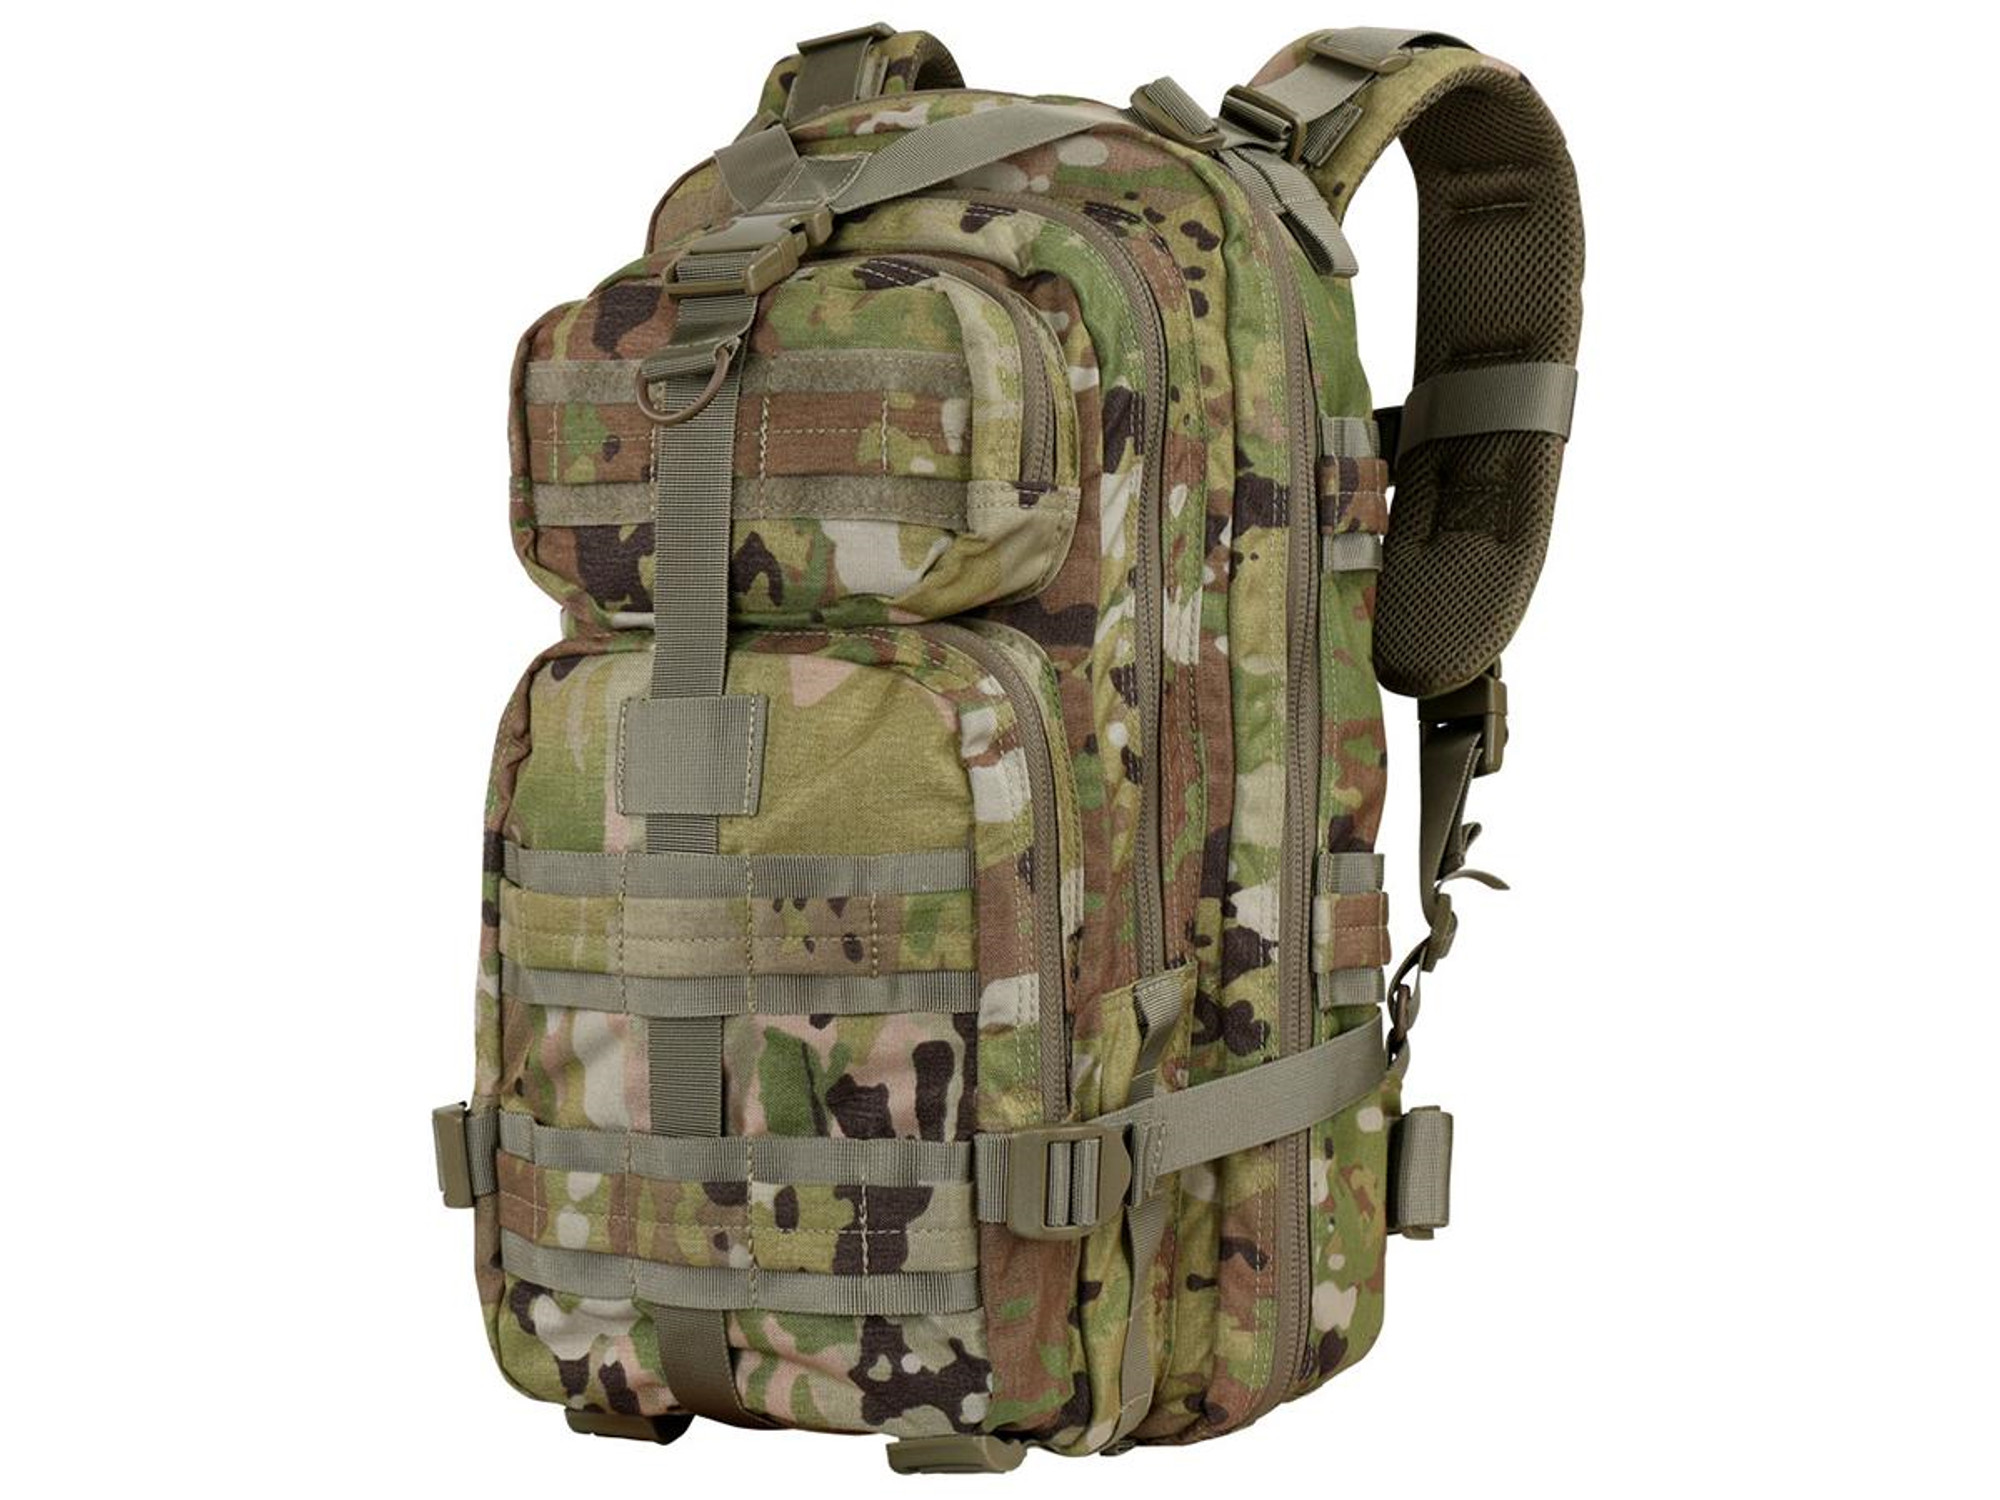 Condor Compact Assault Pack w/ Hydration Compartment (Color: Scorpion OCP)